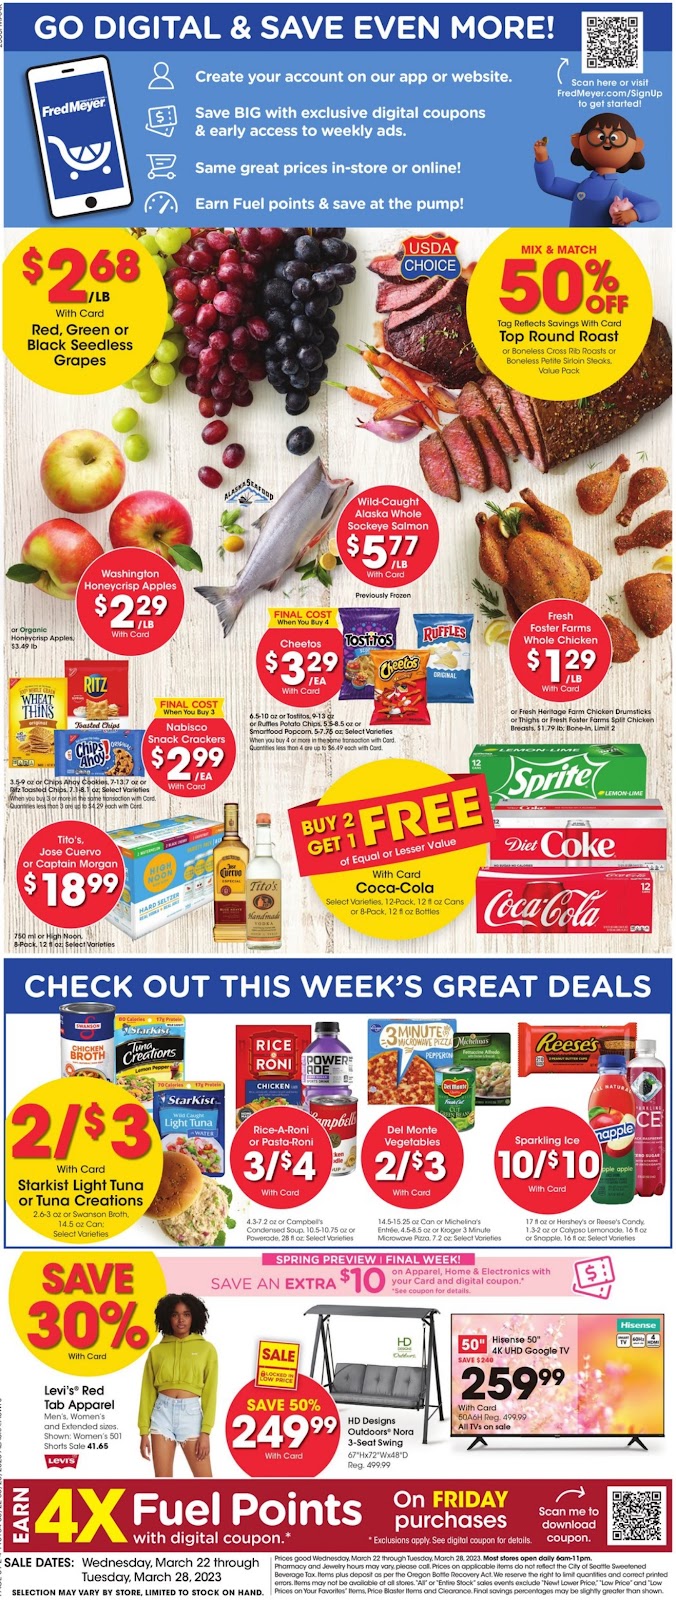 Fred Meyer Weekly Ad - 1